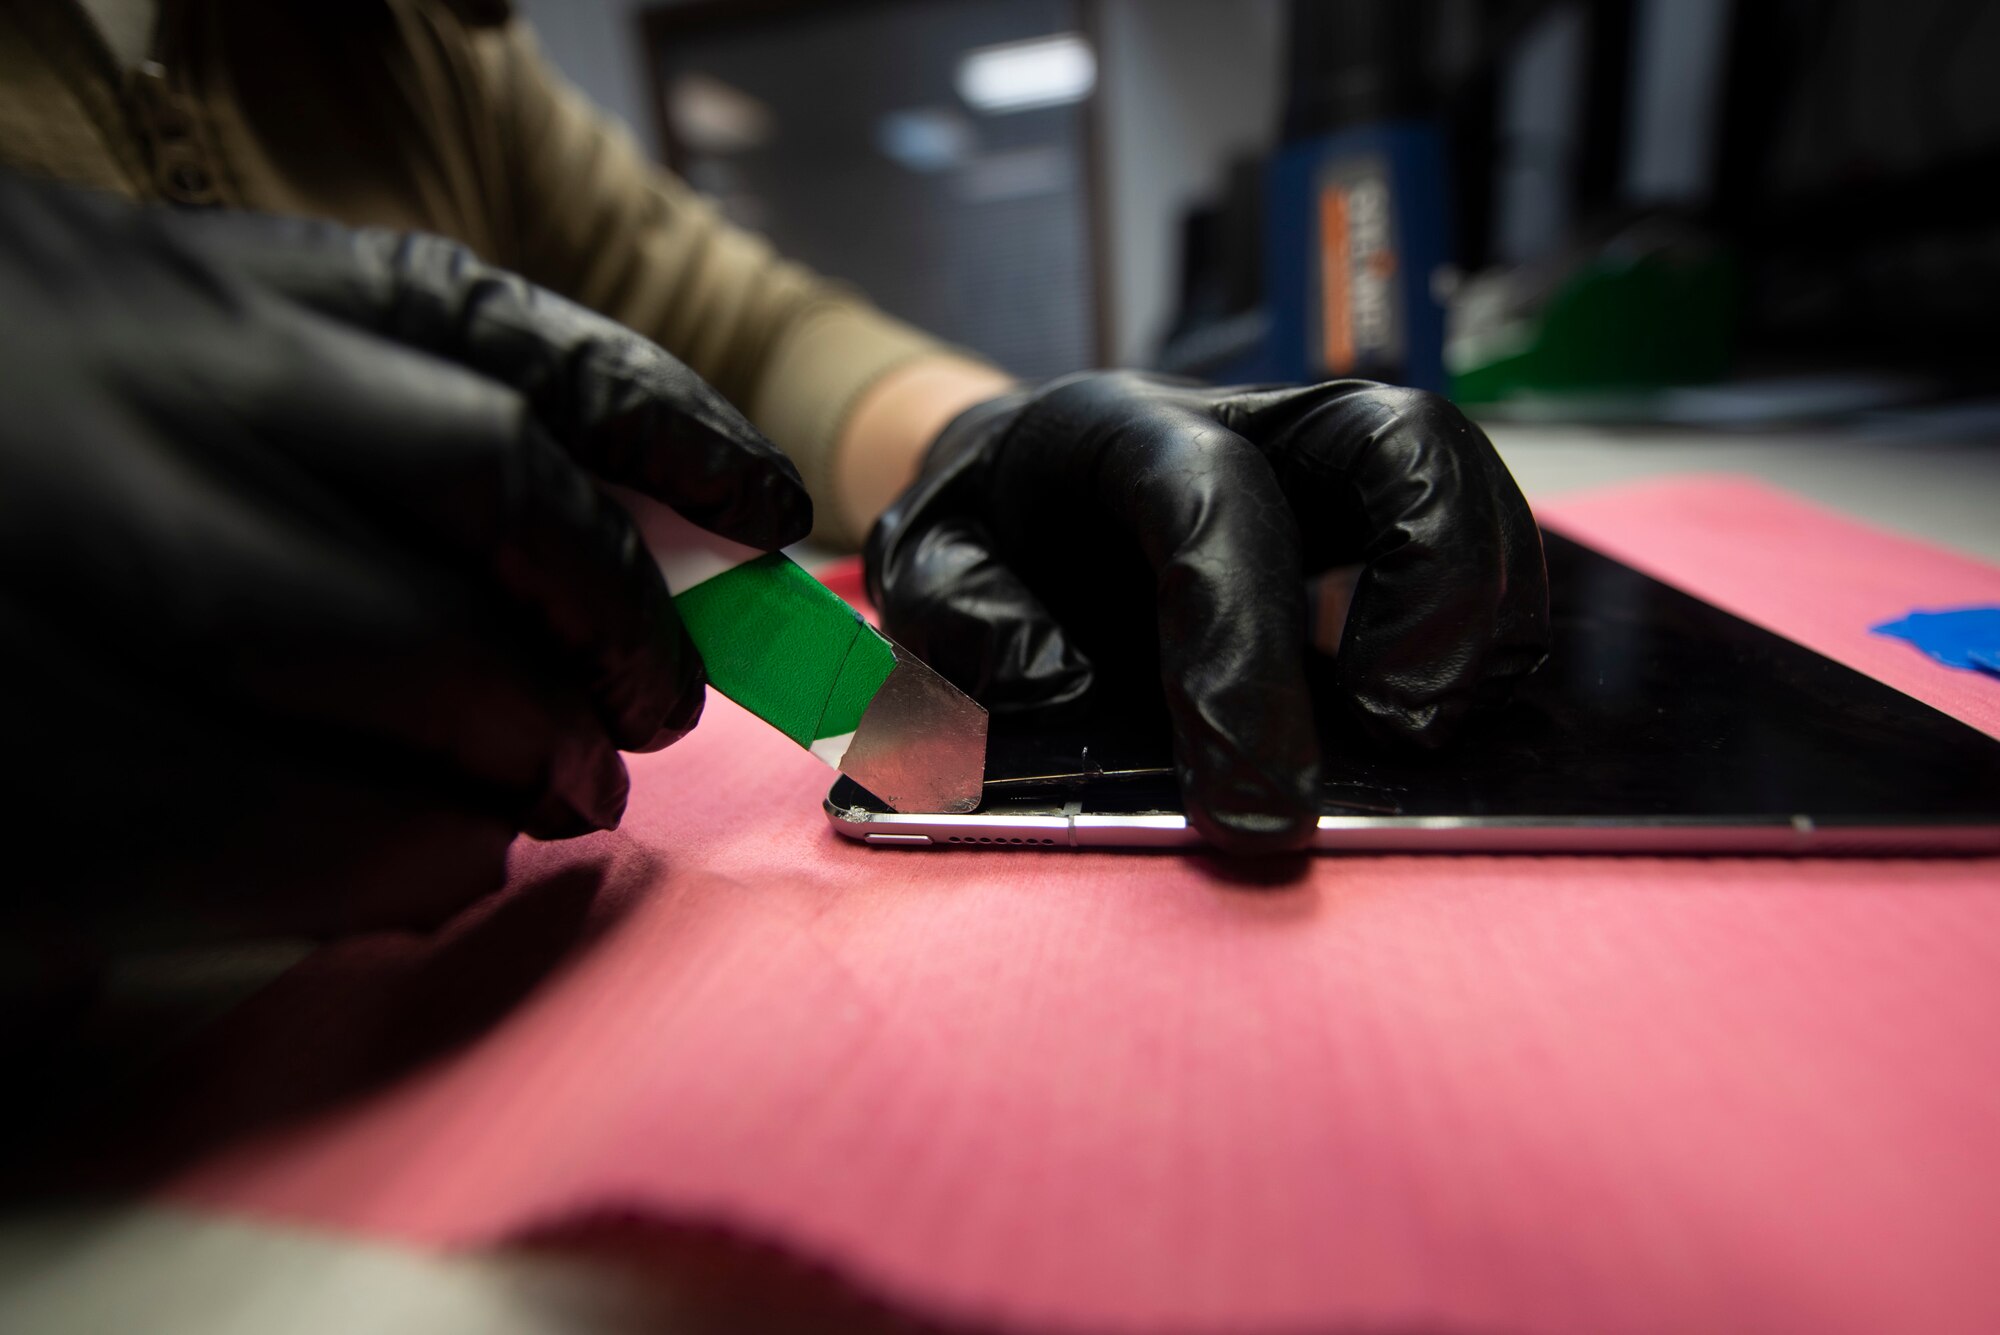 A photo of an Airman removing a tablet screen for repair